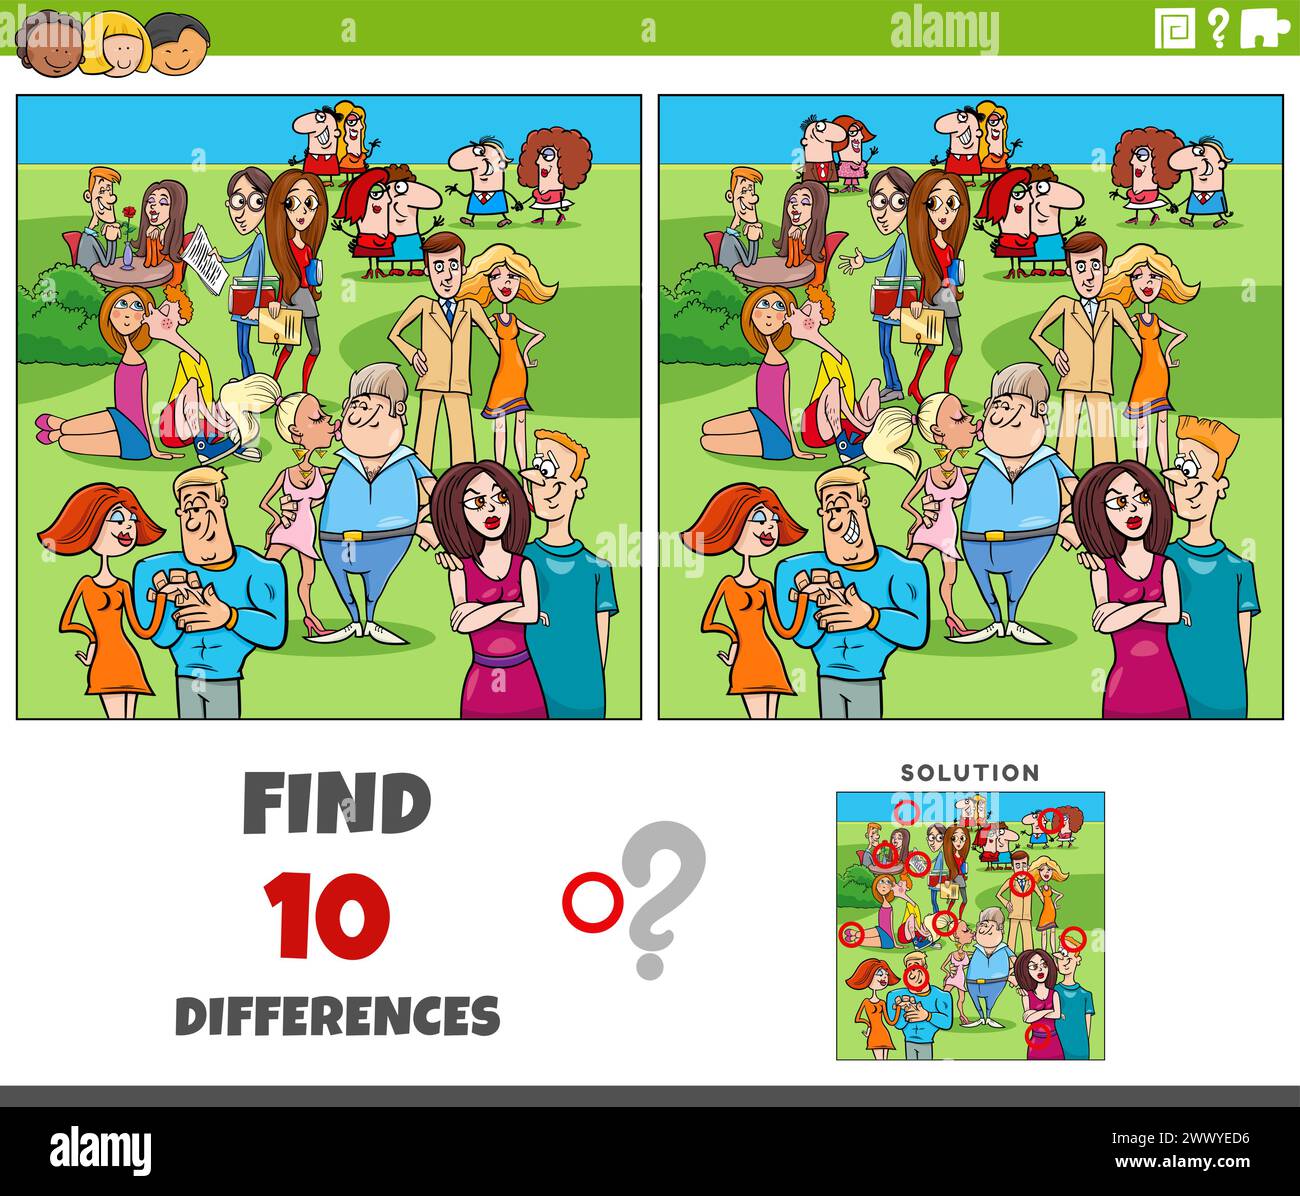 Cartoon illustration of finding the differences between pictures educational game with comic couples Stock Vector